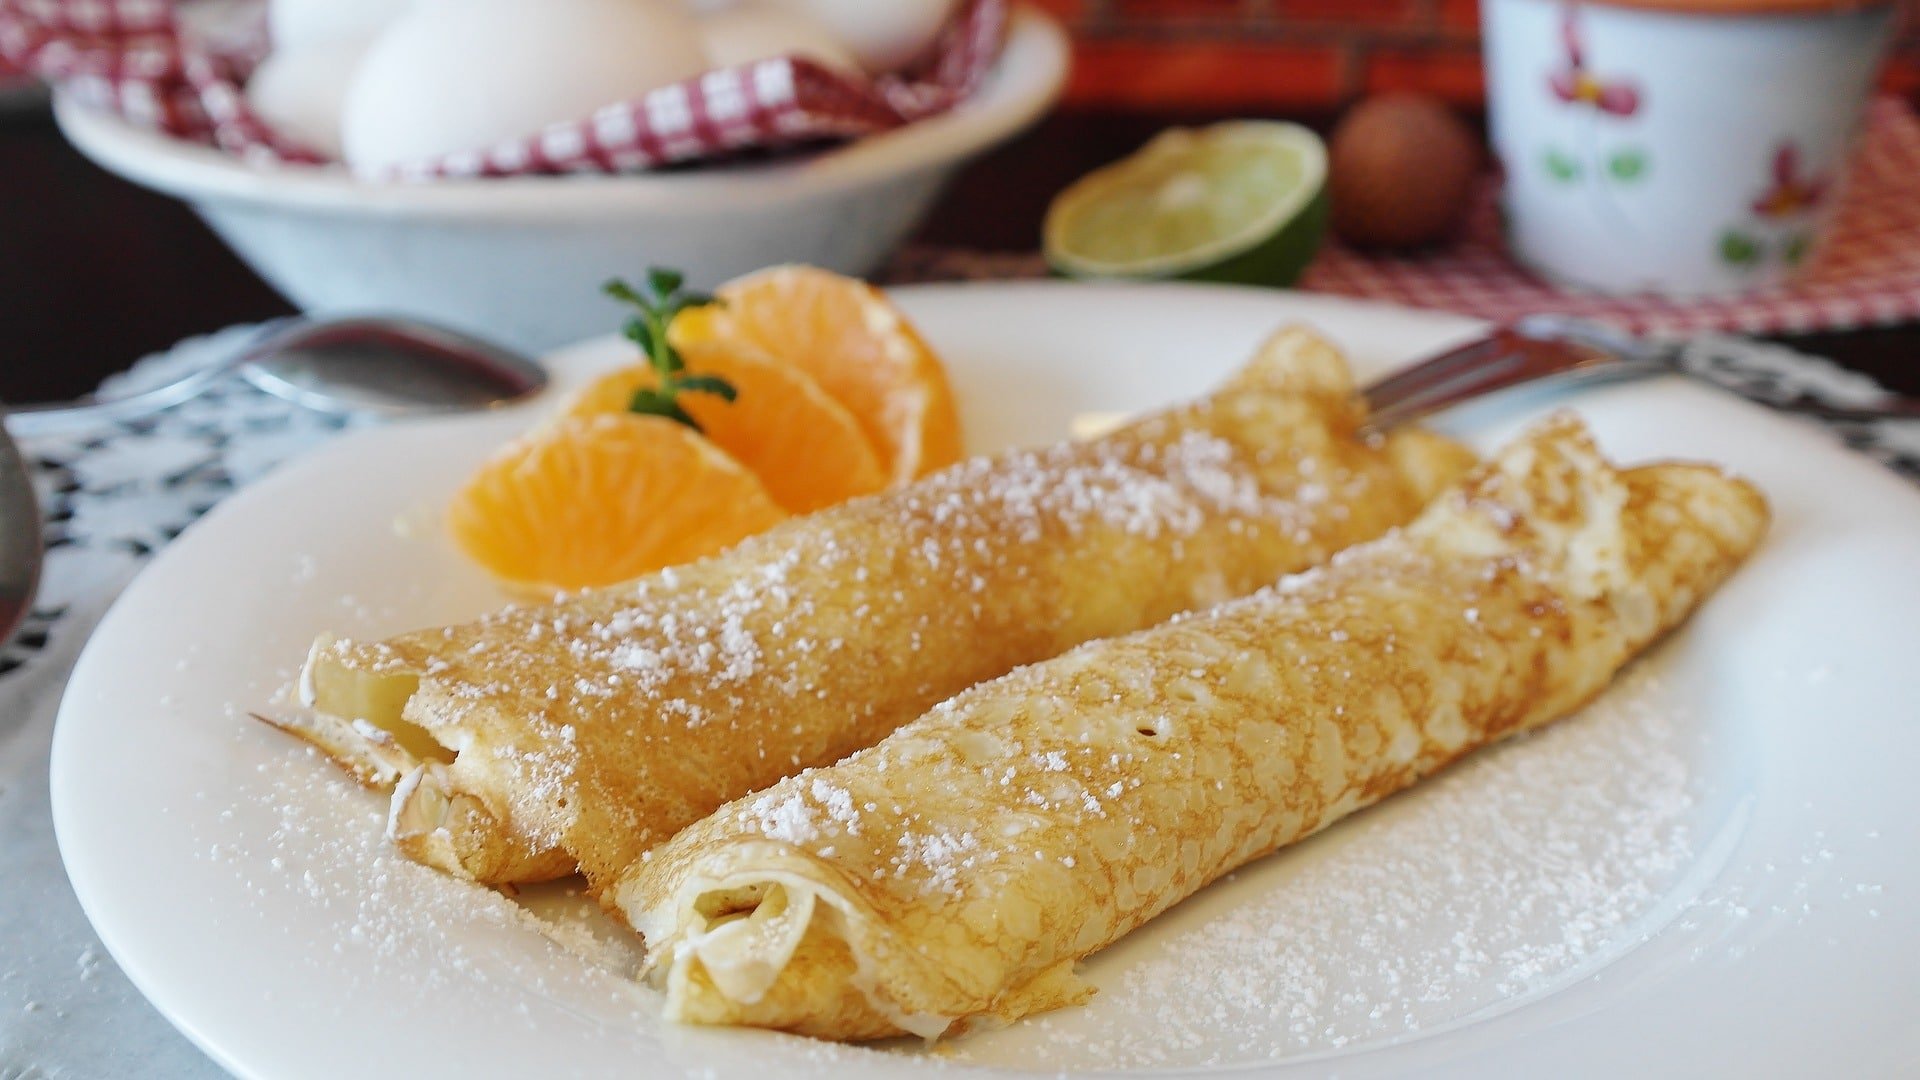 Authentic french crepes recipe as you will eat in Paris. Thin, crispy, easy to make and fill with anything you like such as jam, fruit, chocolate or cream. Easy and halthy traditional french breakfast crepes.